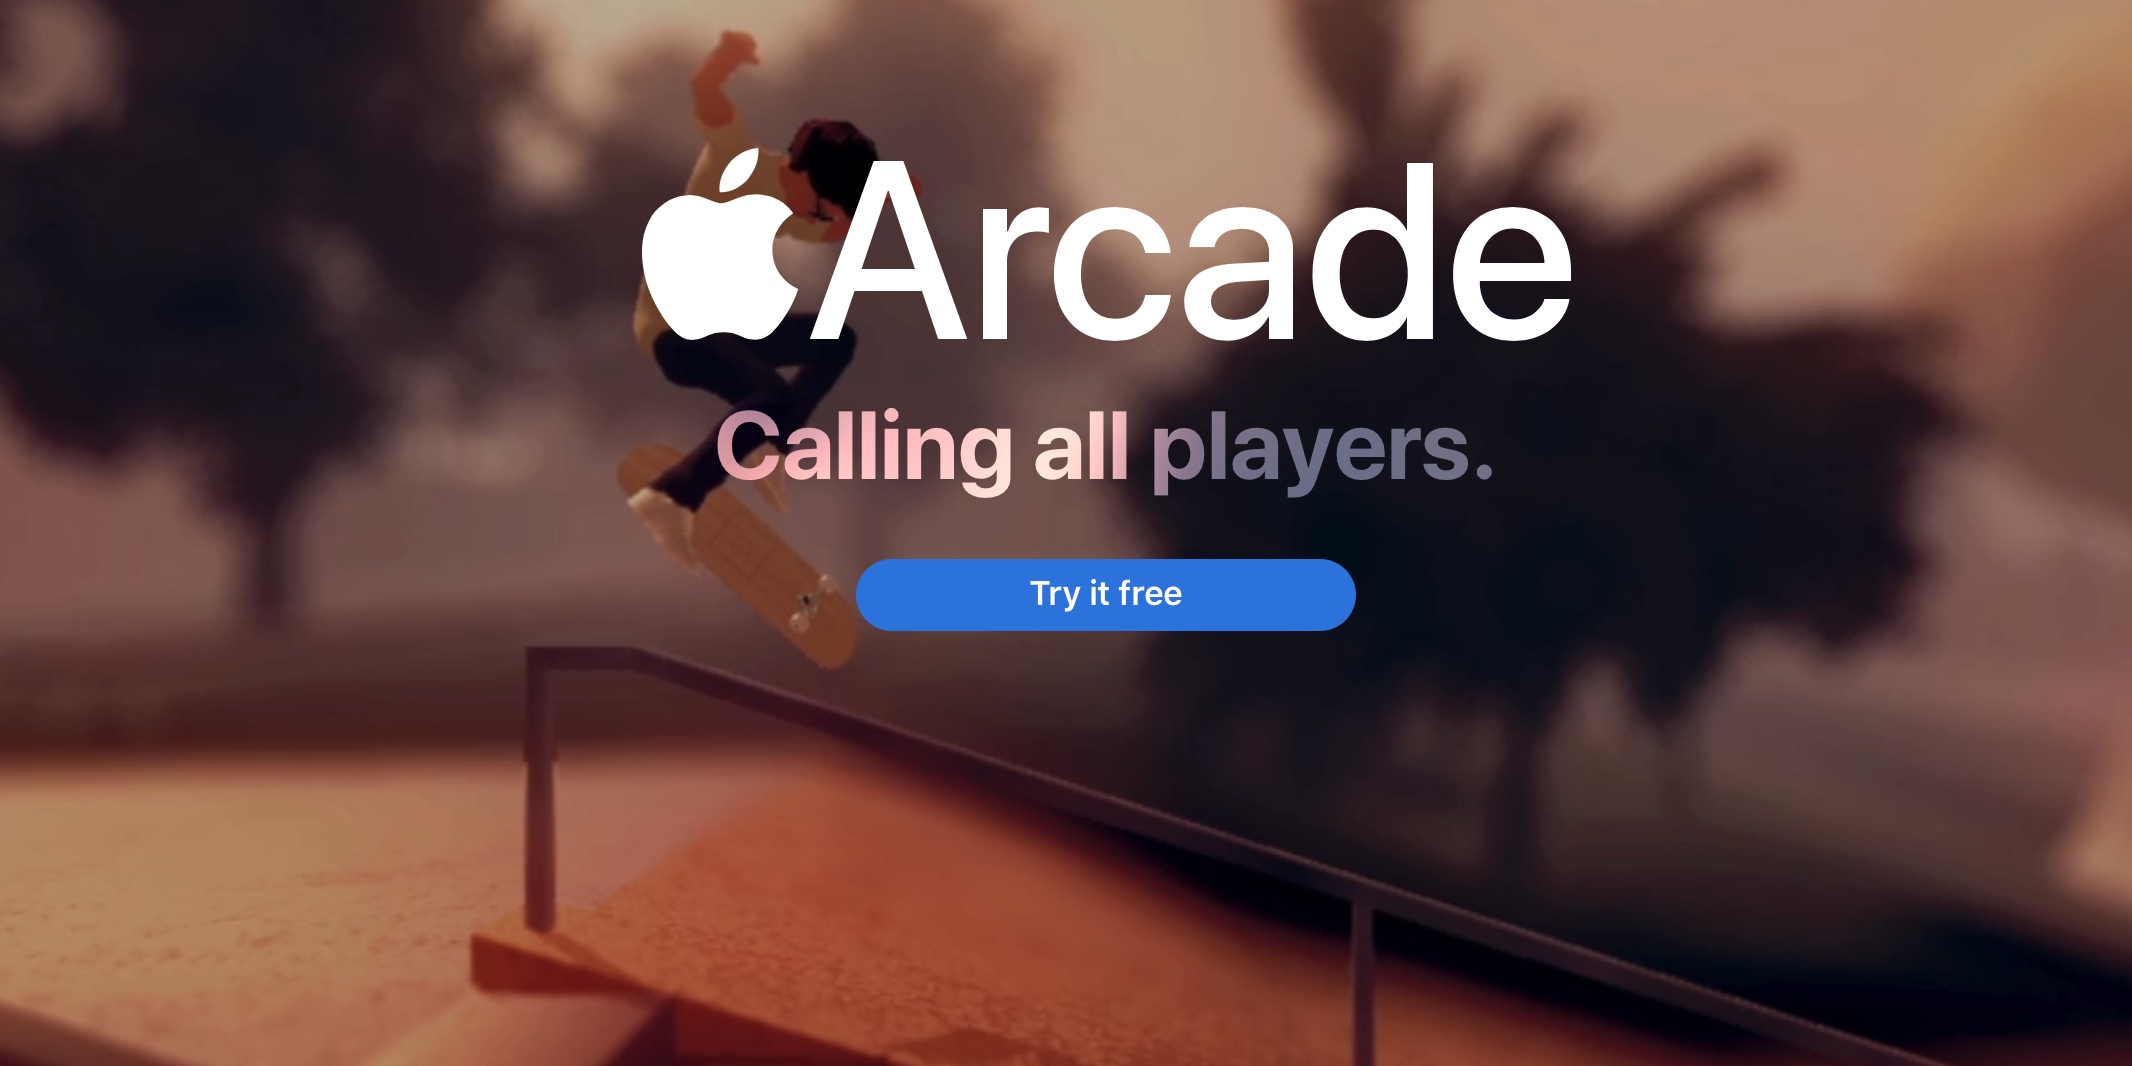 New iPhone, iPad, Mac and Apple TV purchases include 3 month free trial of Apple Arcade